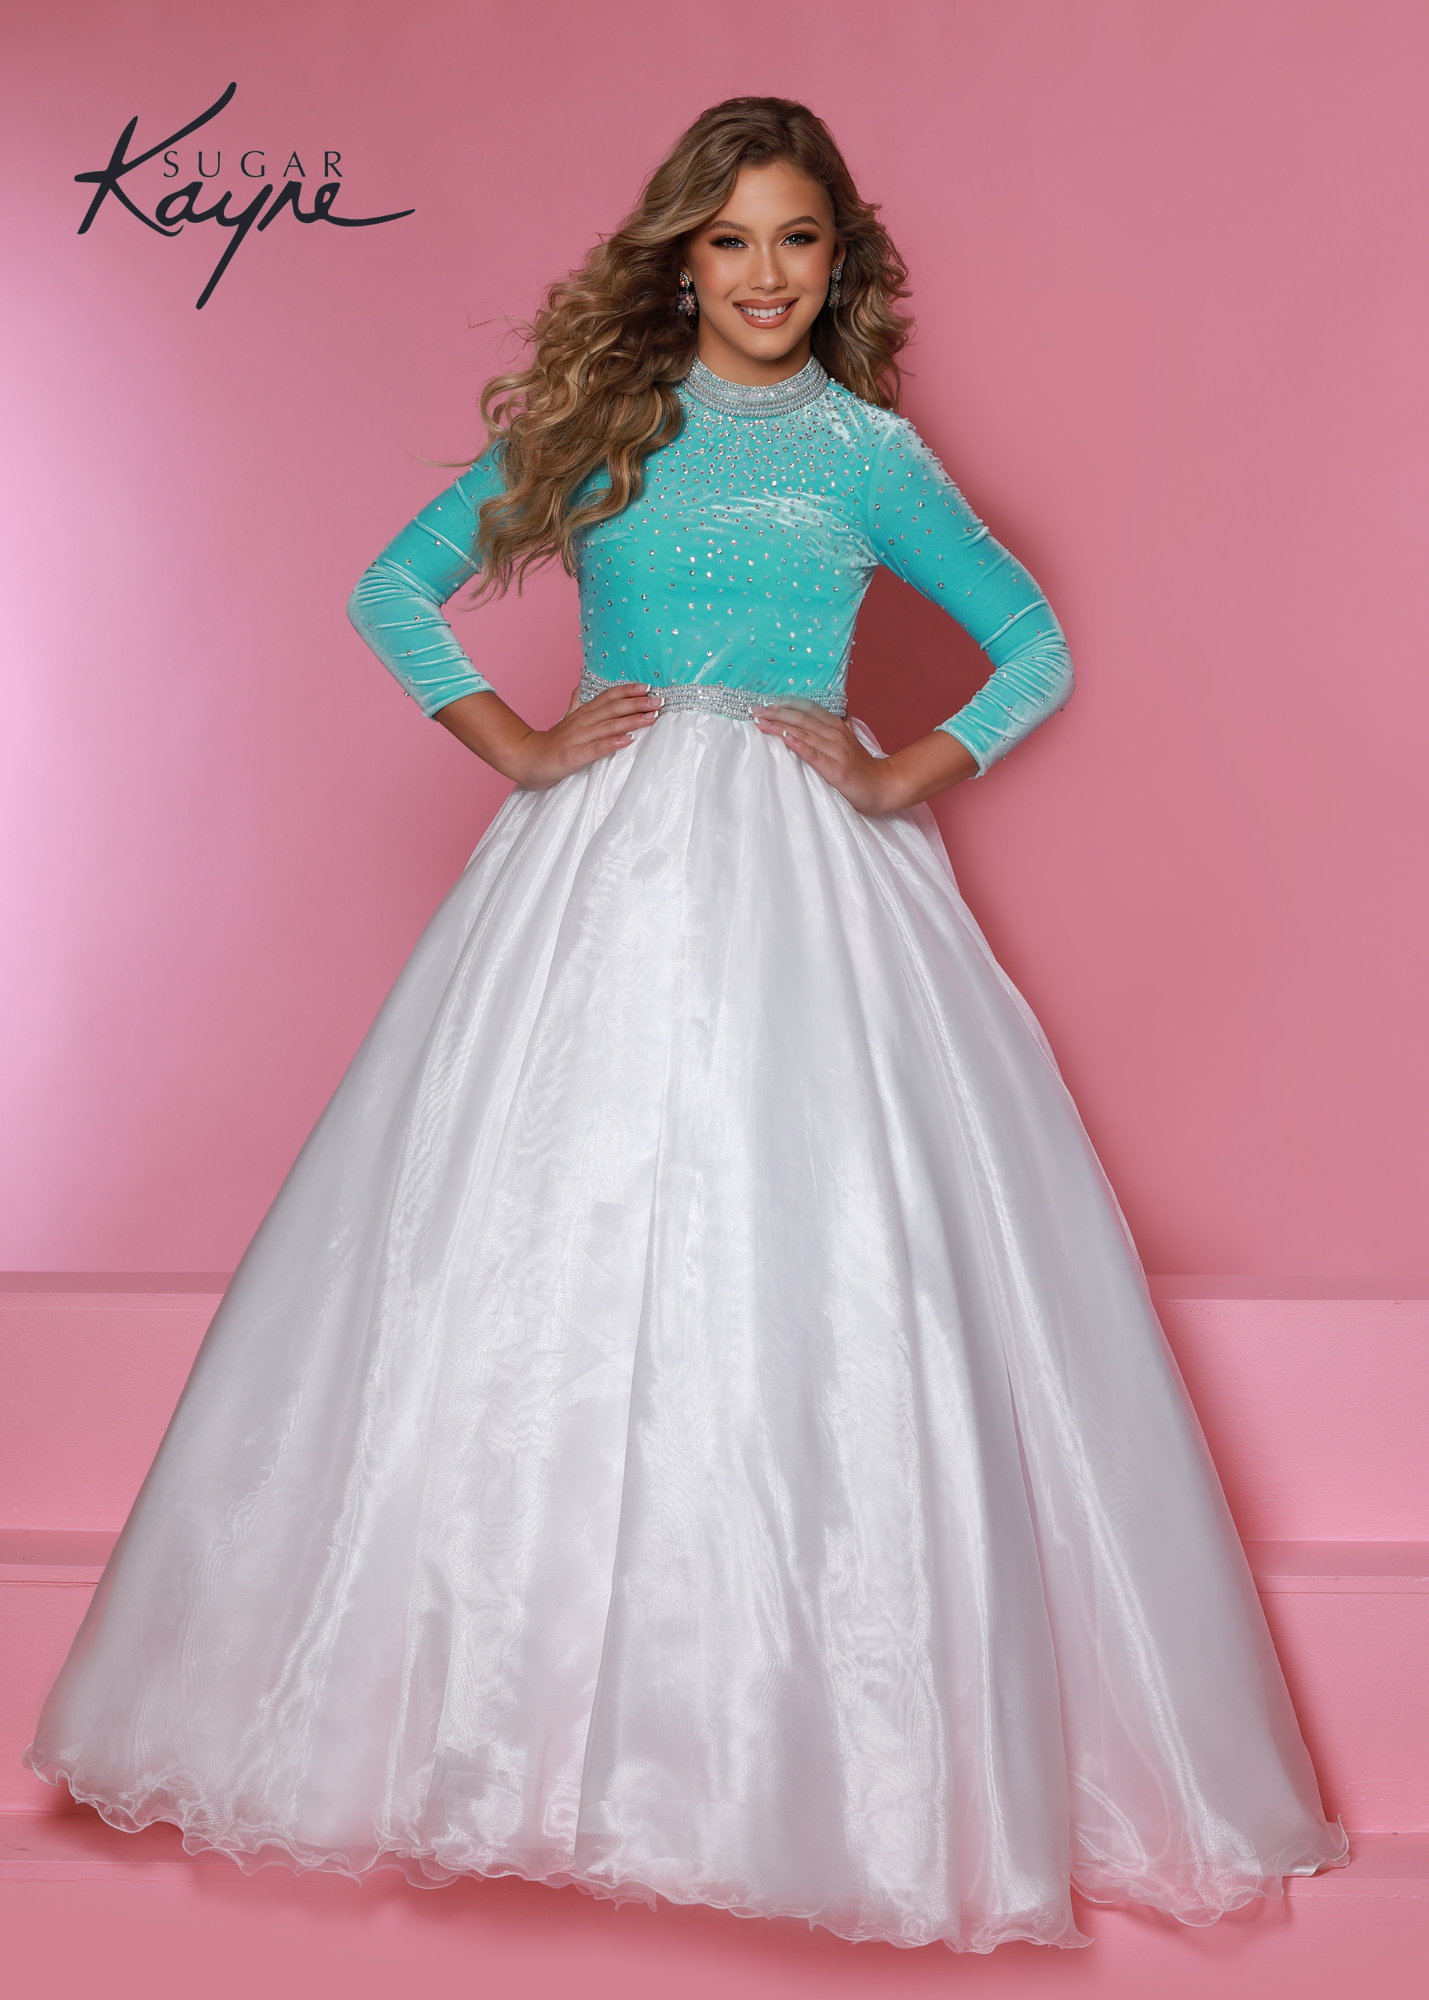 Sugar Kayne C306 Girls Long Sleeve Velvet Bodice Pageant Dress A Line Formal Gown Product Details Perfect in pearls. This long-sleeve color-blocked stretch velvet ballgown is the perfect addition to your closet for your next pageant! The collar and waistband are trimmed with rhinestone and pearls – OH MY!  Color Flamingo-White, Sky Blue-White  Size 2, 4, 6, 8, 10, 12, 14, 16  Fabric Stretch Velvet, Stretch Lining, Organza